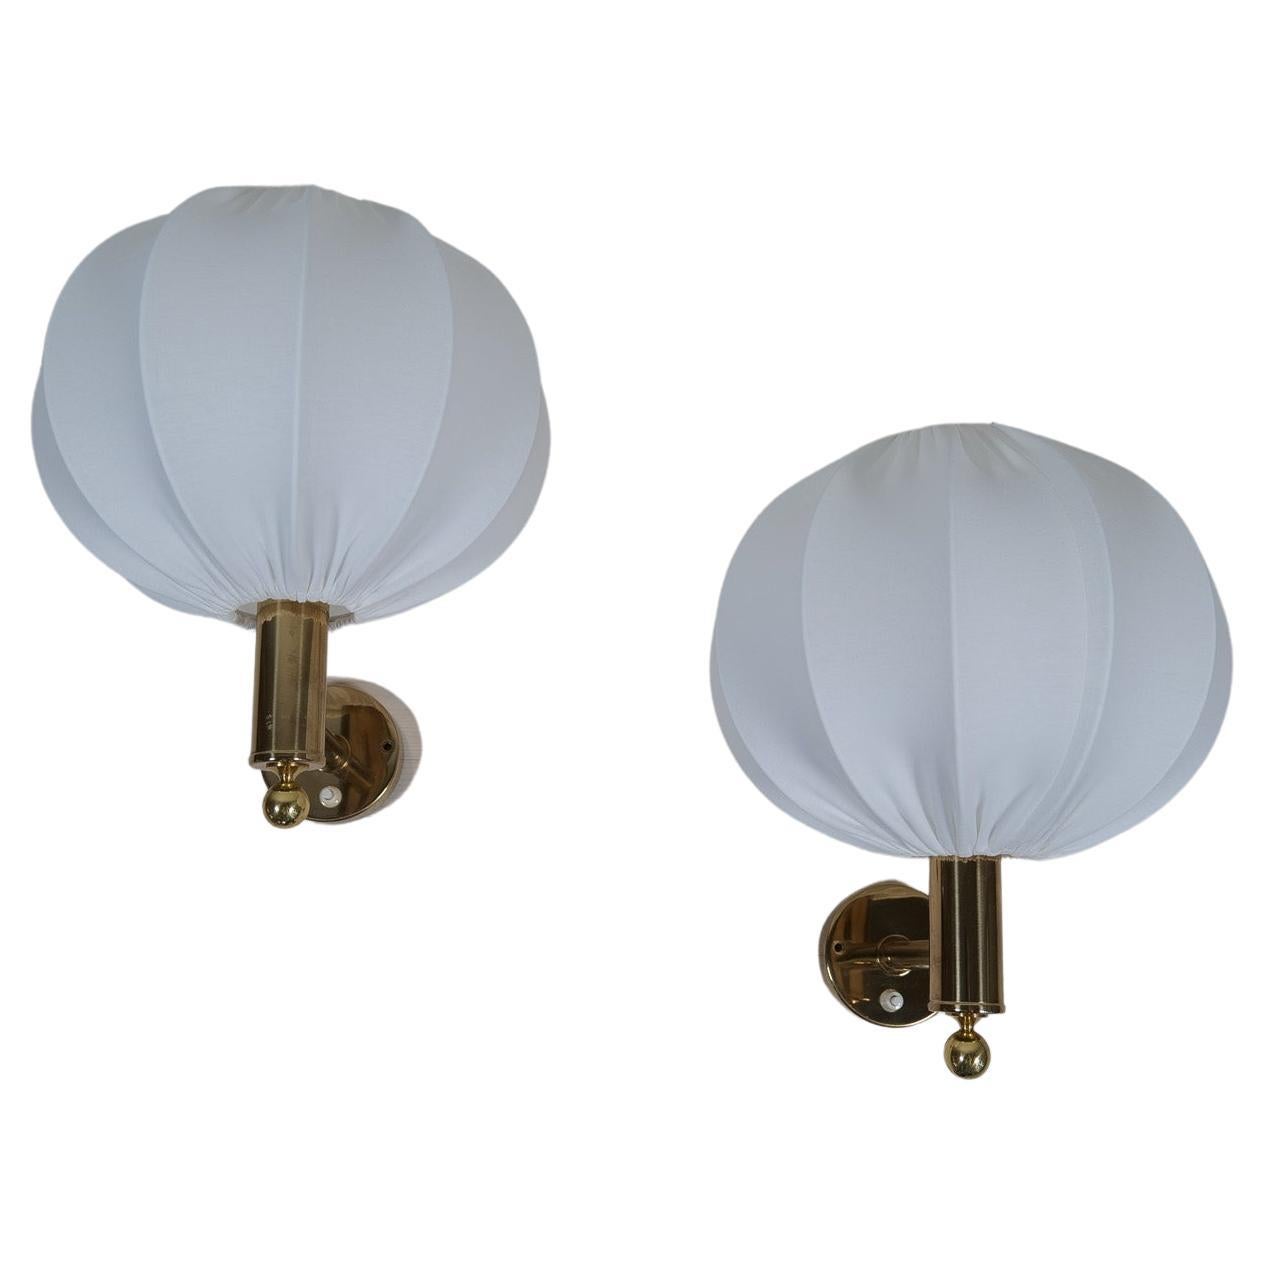 Midcentury Modern Brass Wall Lights with Cotton shades, Sweden, 1960s